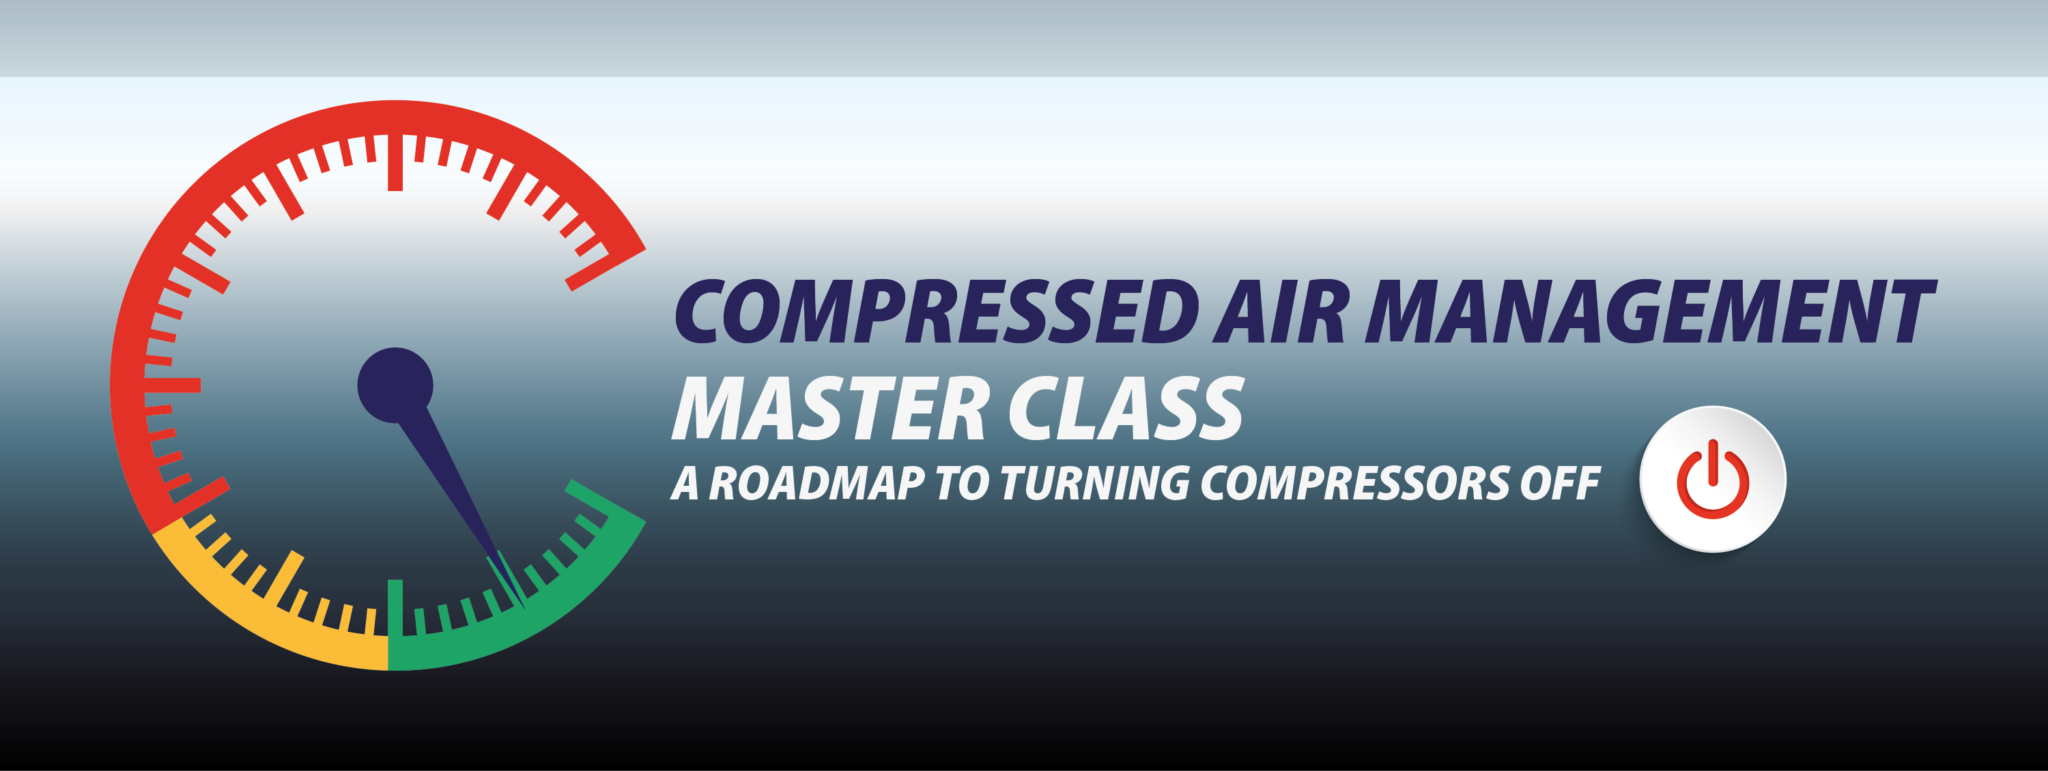 Master-Class-Compressed-Air-Management-2048x771.png